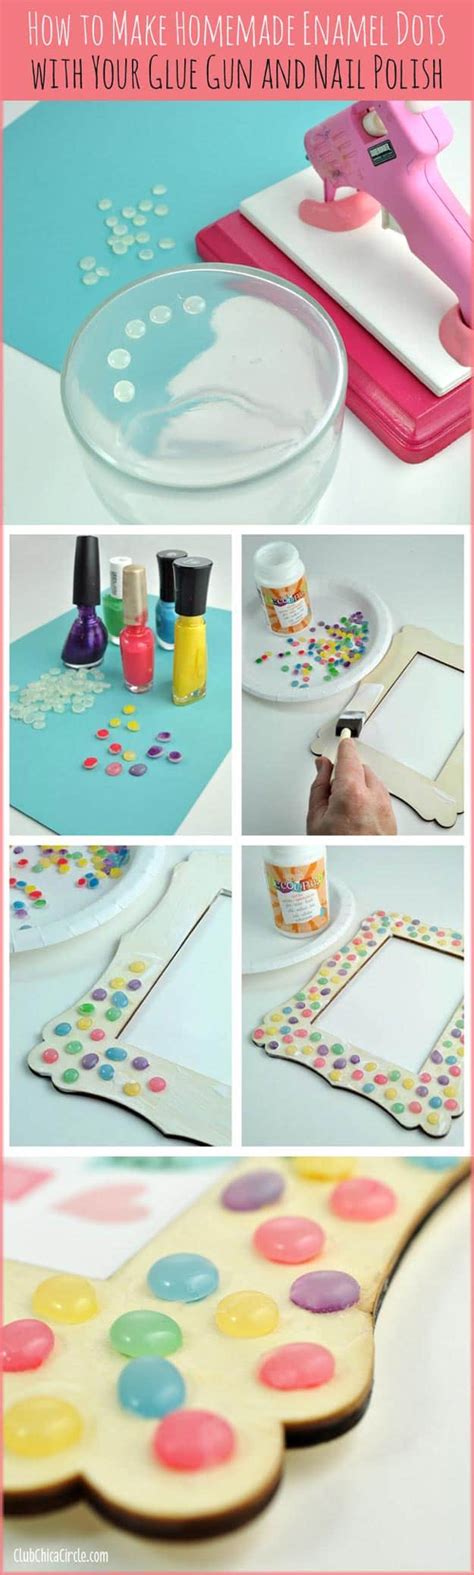 Keeping It Simple 15 Awesome Crafts Made With Hot Glue Craft With Glue